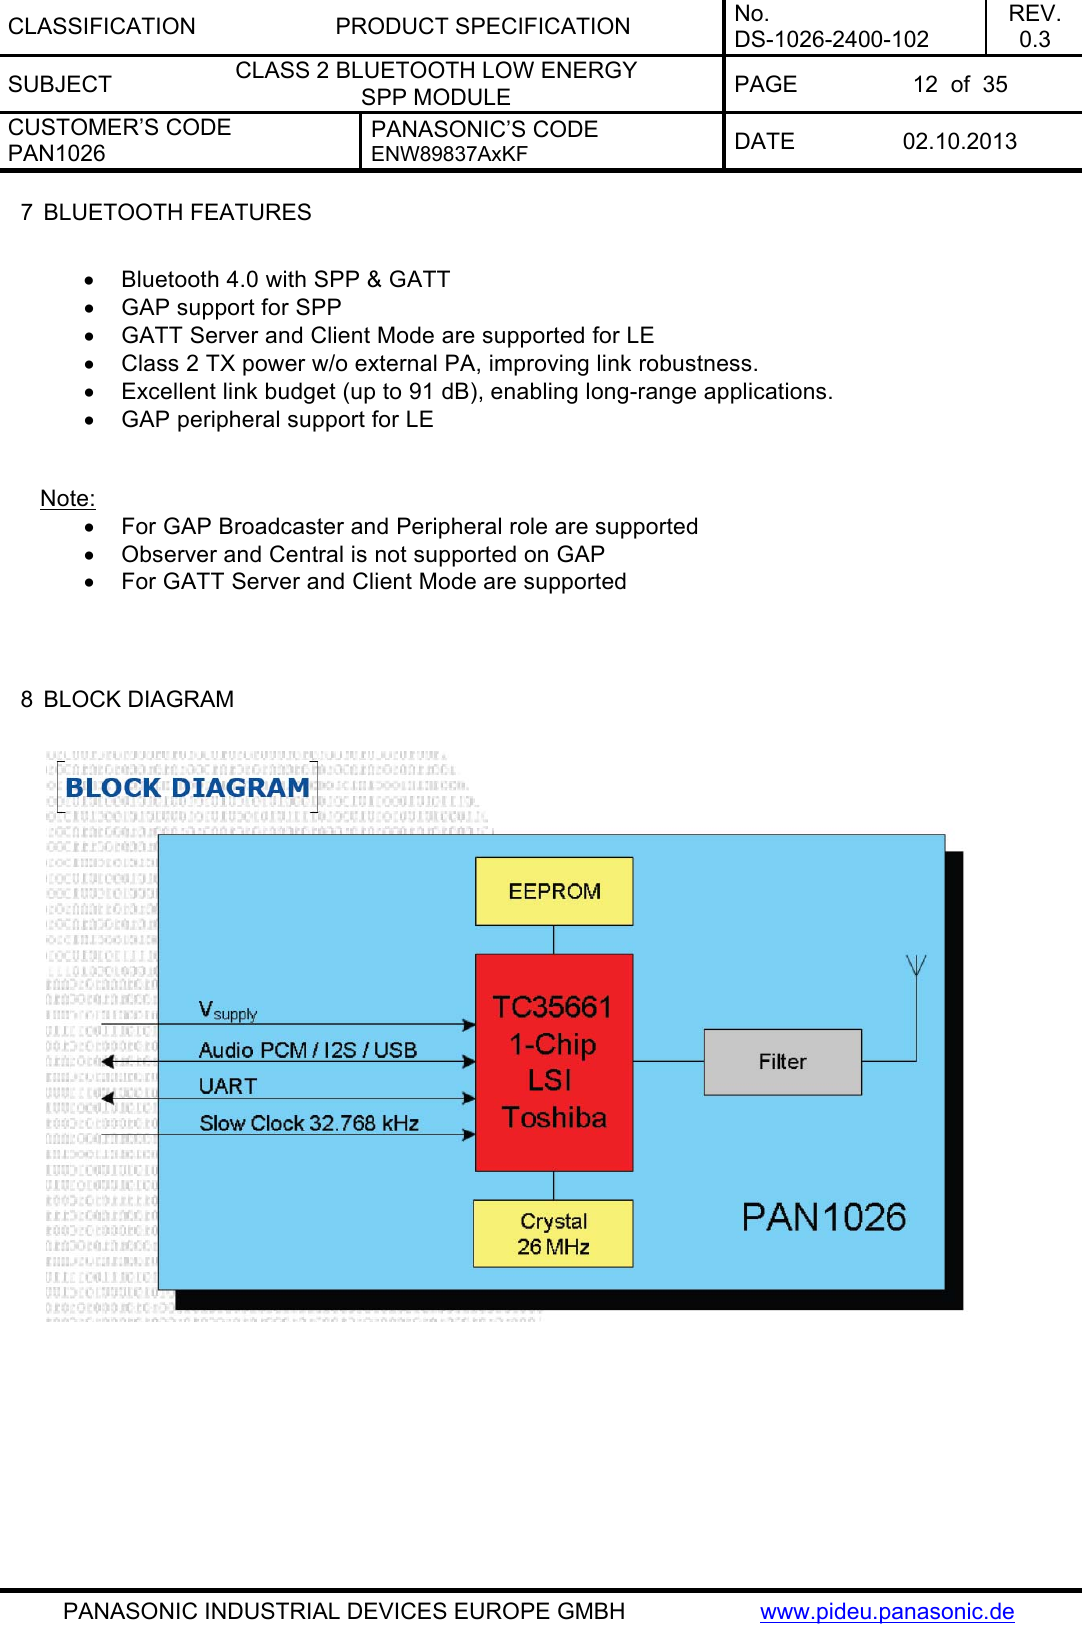 CLASSIFICATION PRODUCT SPECIFICATION No. DS-1026-2400-102 REV. 0.3 SUBJECT  CLASS 2 BLUETOOTH LOW ENERGY  SPP MODULE  PAGE  12  of  35 CUSTOMER’S CODE PAN1026 PANASONIC’S CODE ENW89837AxKF  DATE 02.10.2013   PANASONIC INDUSTRIAL DEVICES EUROPE GMBH  www.pideu.panasonic.de 7  BLUETOOTH FEATURES   Bluetooth 4.0 with SPP &amp; GATT   GAP support for SPP    GATT Server and Client Mode are supported for LE   Class 2 TX power w/o external PA, improving link robustness.   Excellent link budget (up to 91 dB), enabling long-range applications.   GAP peripheral support for LE   Note:   For GAP Broadcaster and Peripheral role are supported   Observer and Central is not supported on GAP   For GATT Server and Client Mode are supported    8  BLOCK DIAGRAM     